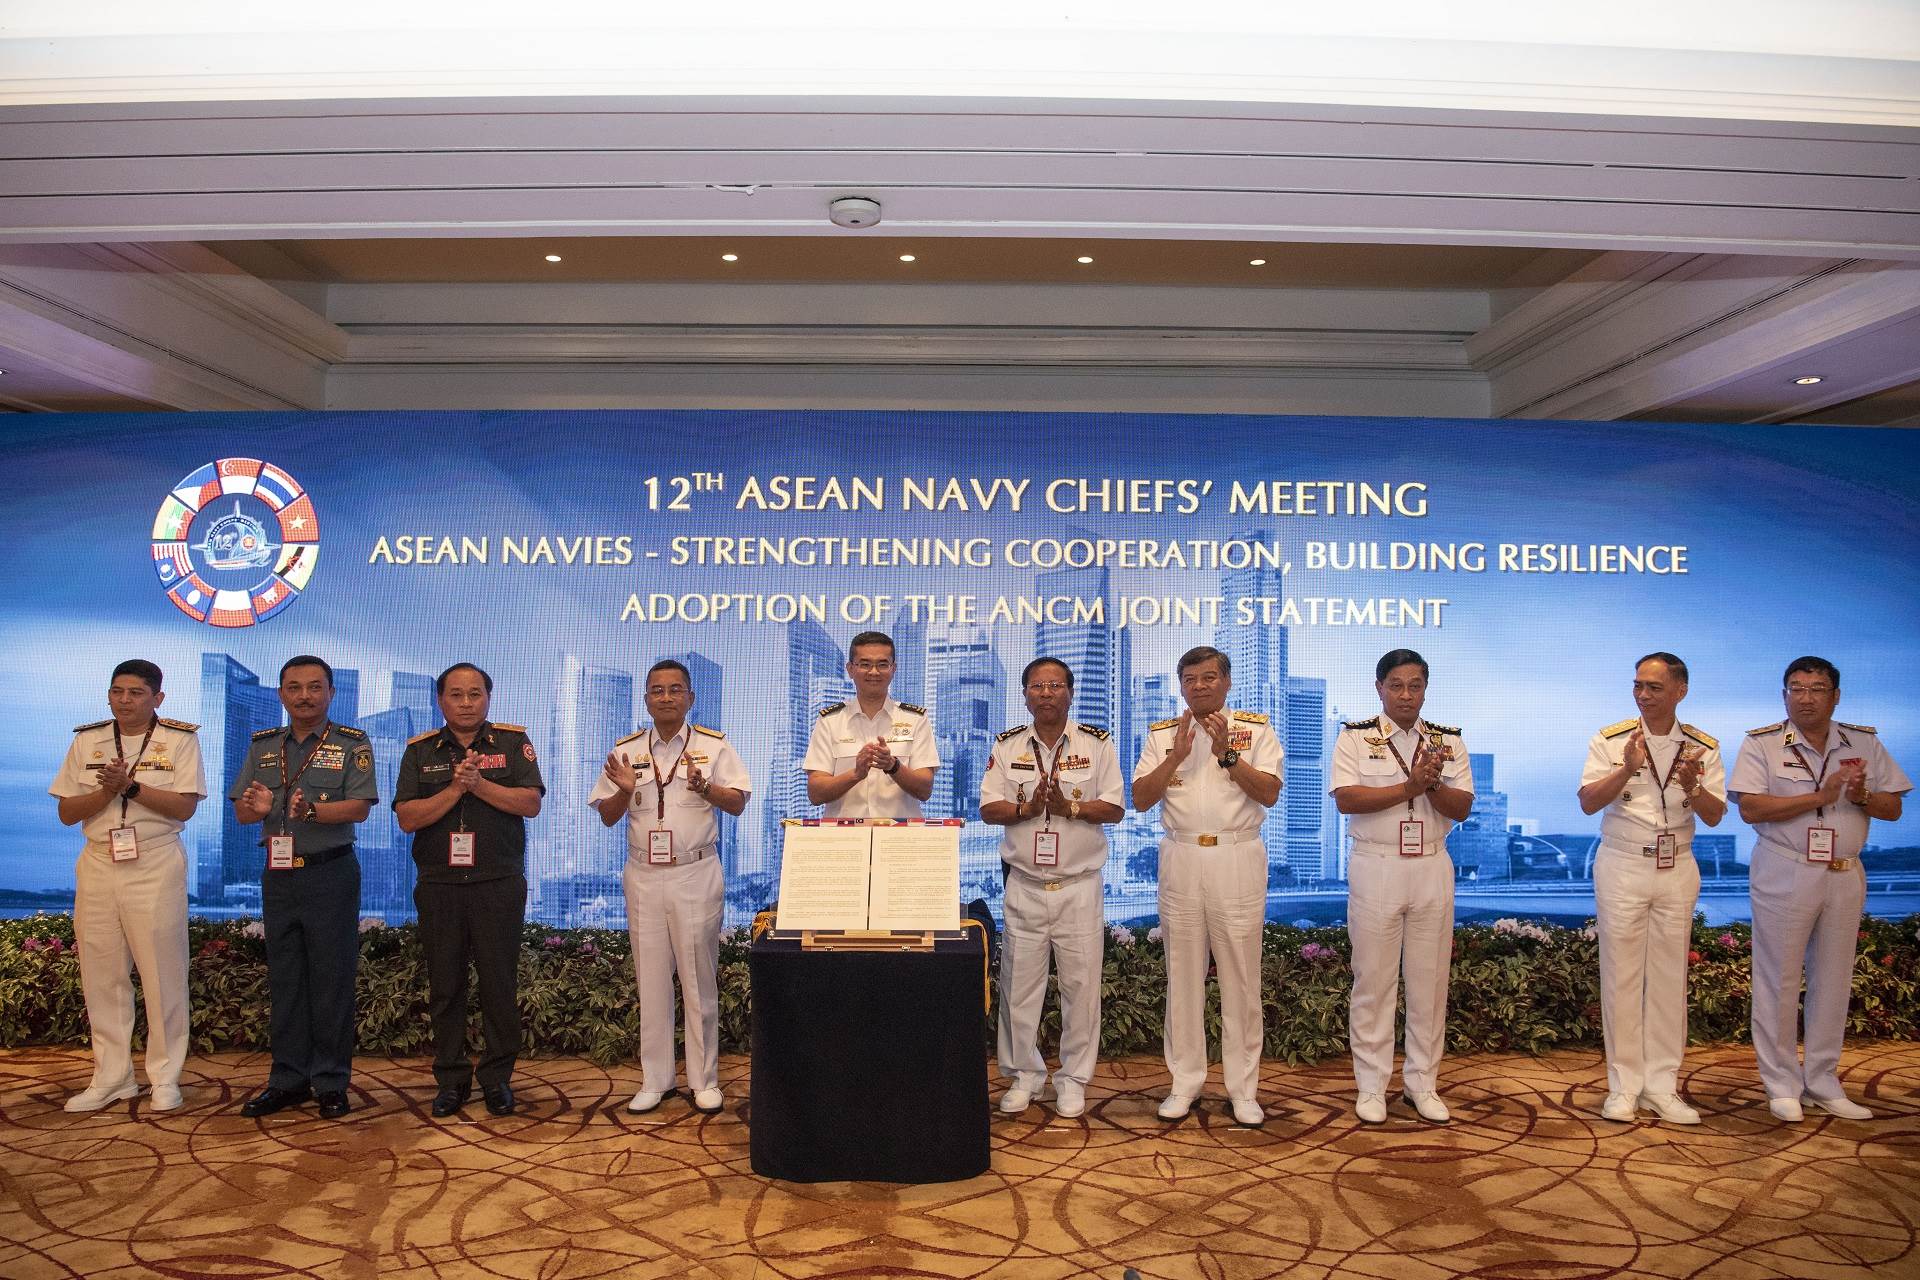 The ASEAN Navy Chiefs unveiling the 12th ASEAN Navy Chiefs' Meeting Joint Statement.
